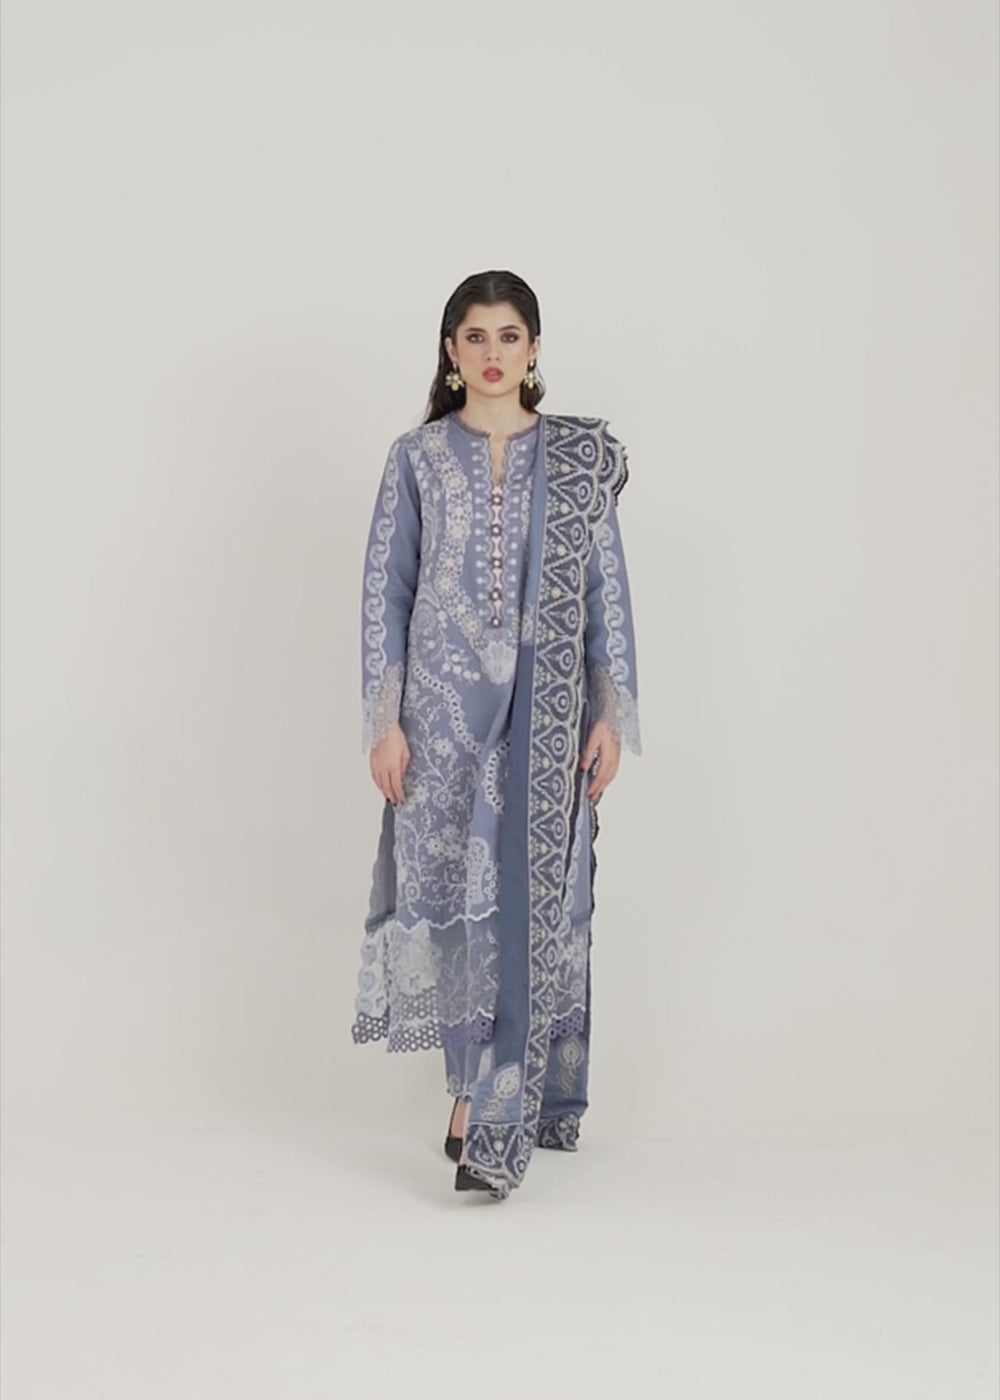 Buy Now Moroccan Dreams '23 by Mushq - LATIFAH at Empress Online in USA, UK, Canada & Worldwide at Empress Clothing. 